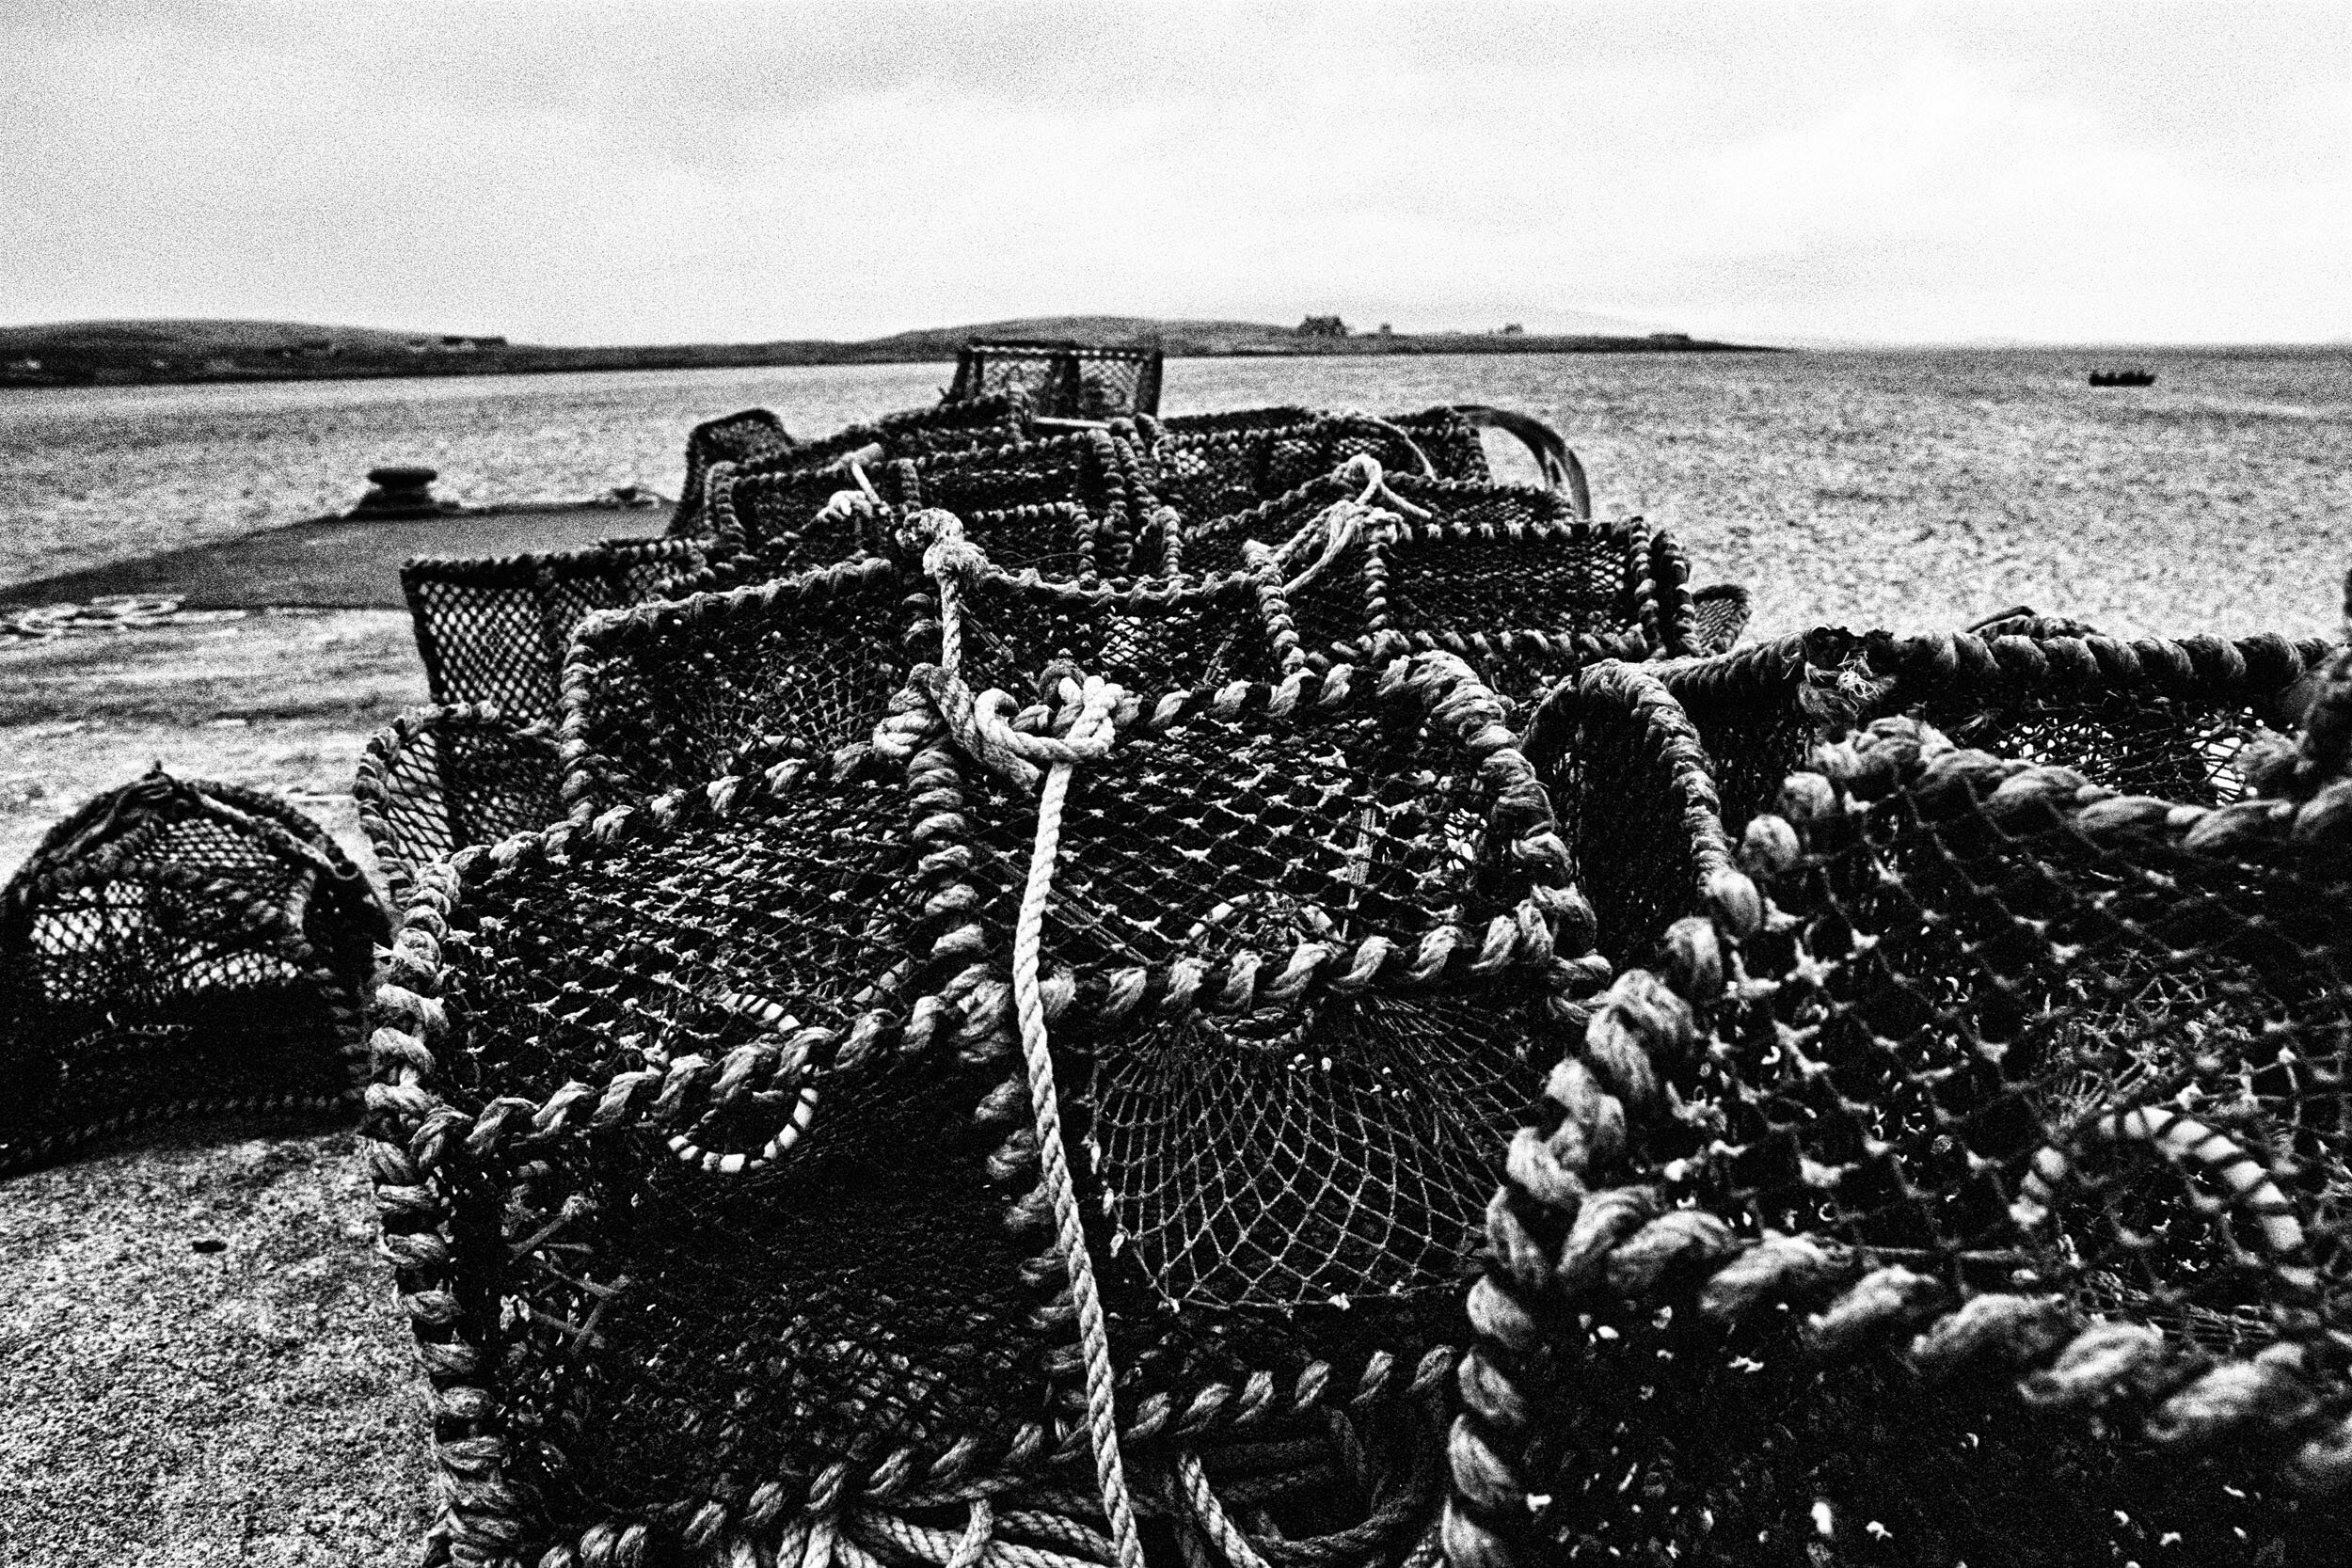  Lobster Traps, Berneray Harbour, Isle of Berneray, 2018 